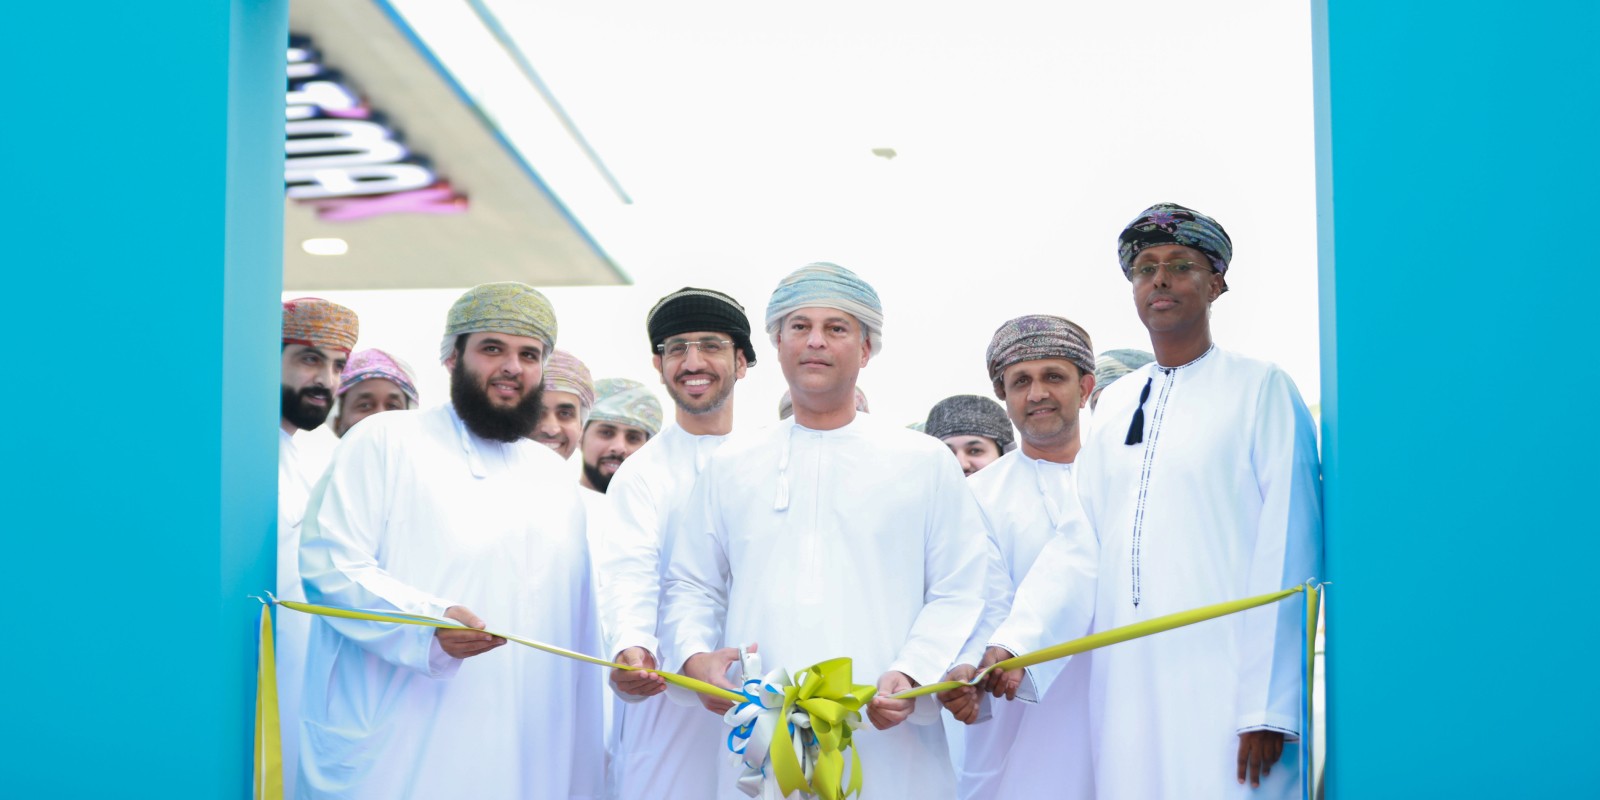 OOMCO LAUNCHES MEGA SERVICE STATION IN MA’ABILAH TO OFFER A SEAMLESS ONE-STOP-SHOP CUSTOMER EXPERIENCE